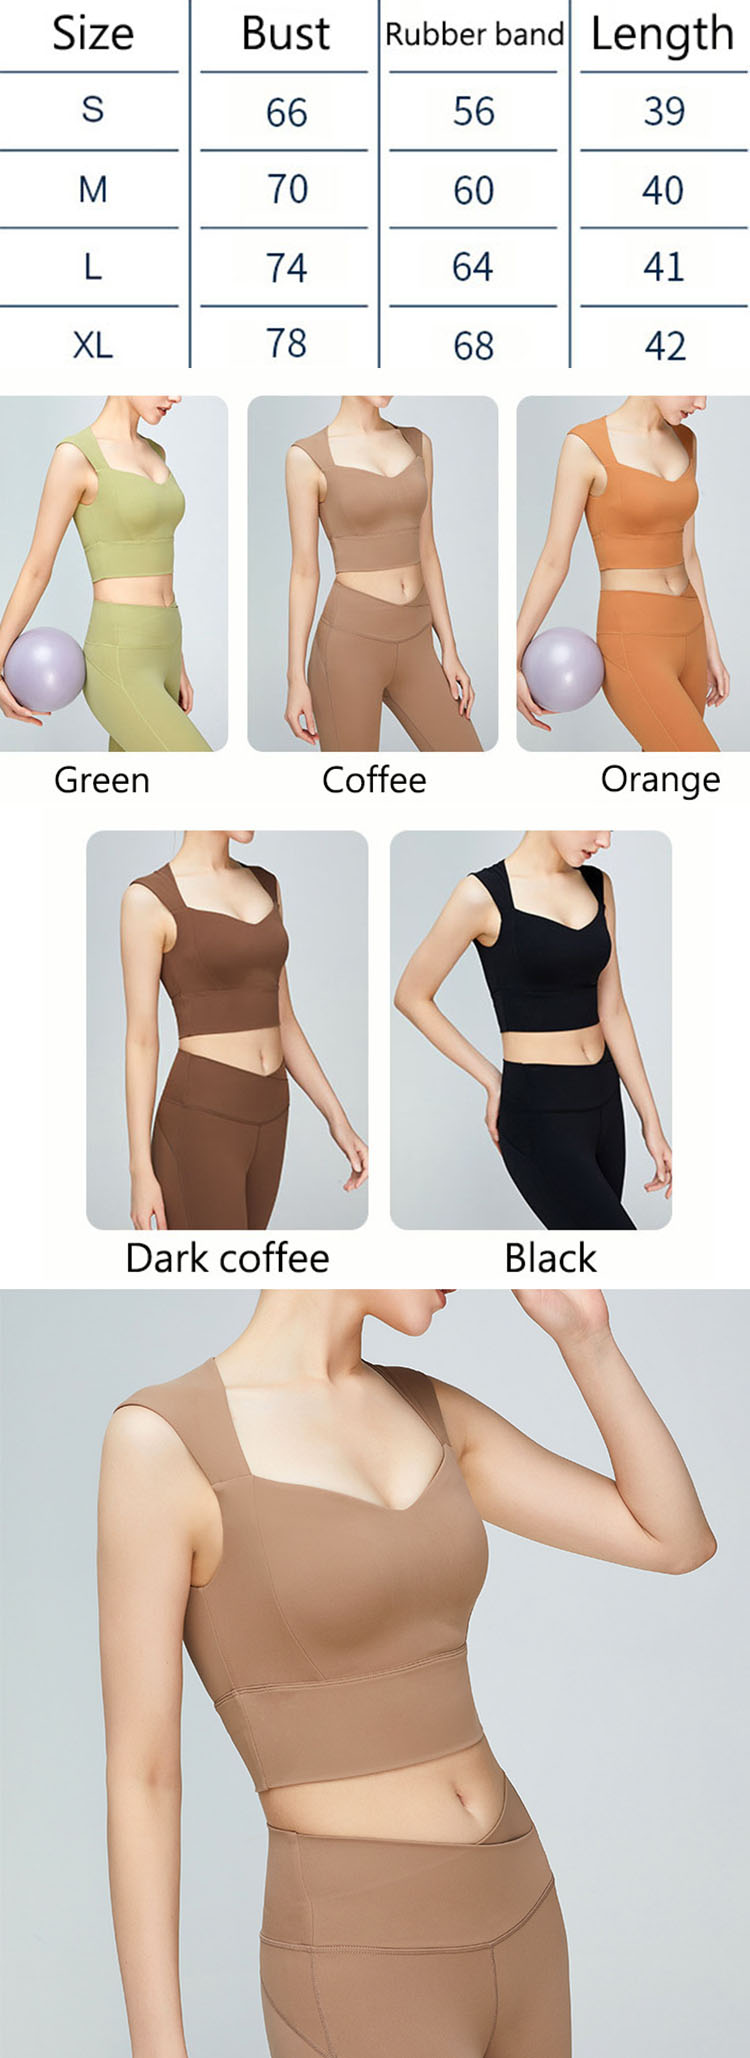 The design of athletic sports bra is one of the common design techniques in POLO shirts